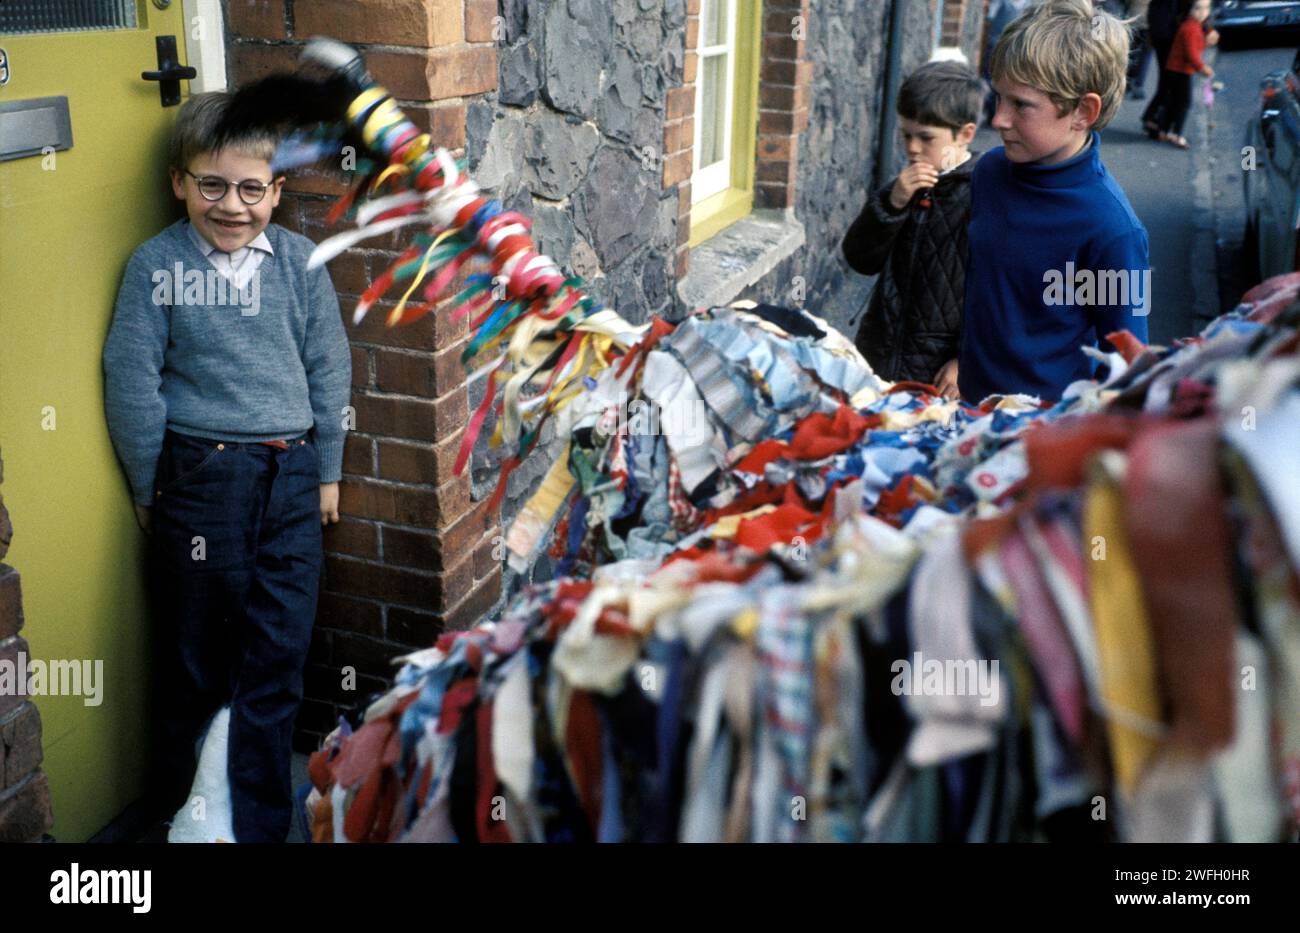 1980s boy UK, wearing old fashioned regulation National Health Service spectacles. Minehead Sailors Horse bows three times to him. An annual local May Day folk custom. Minehead, Somerset England UK. 1980s HOMER SYKES Stock Photo